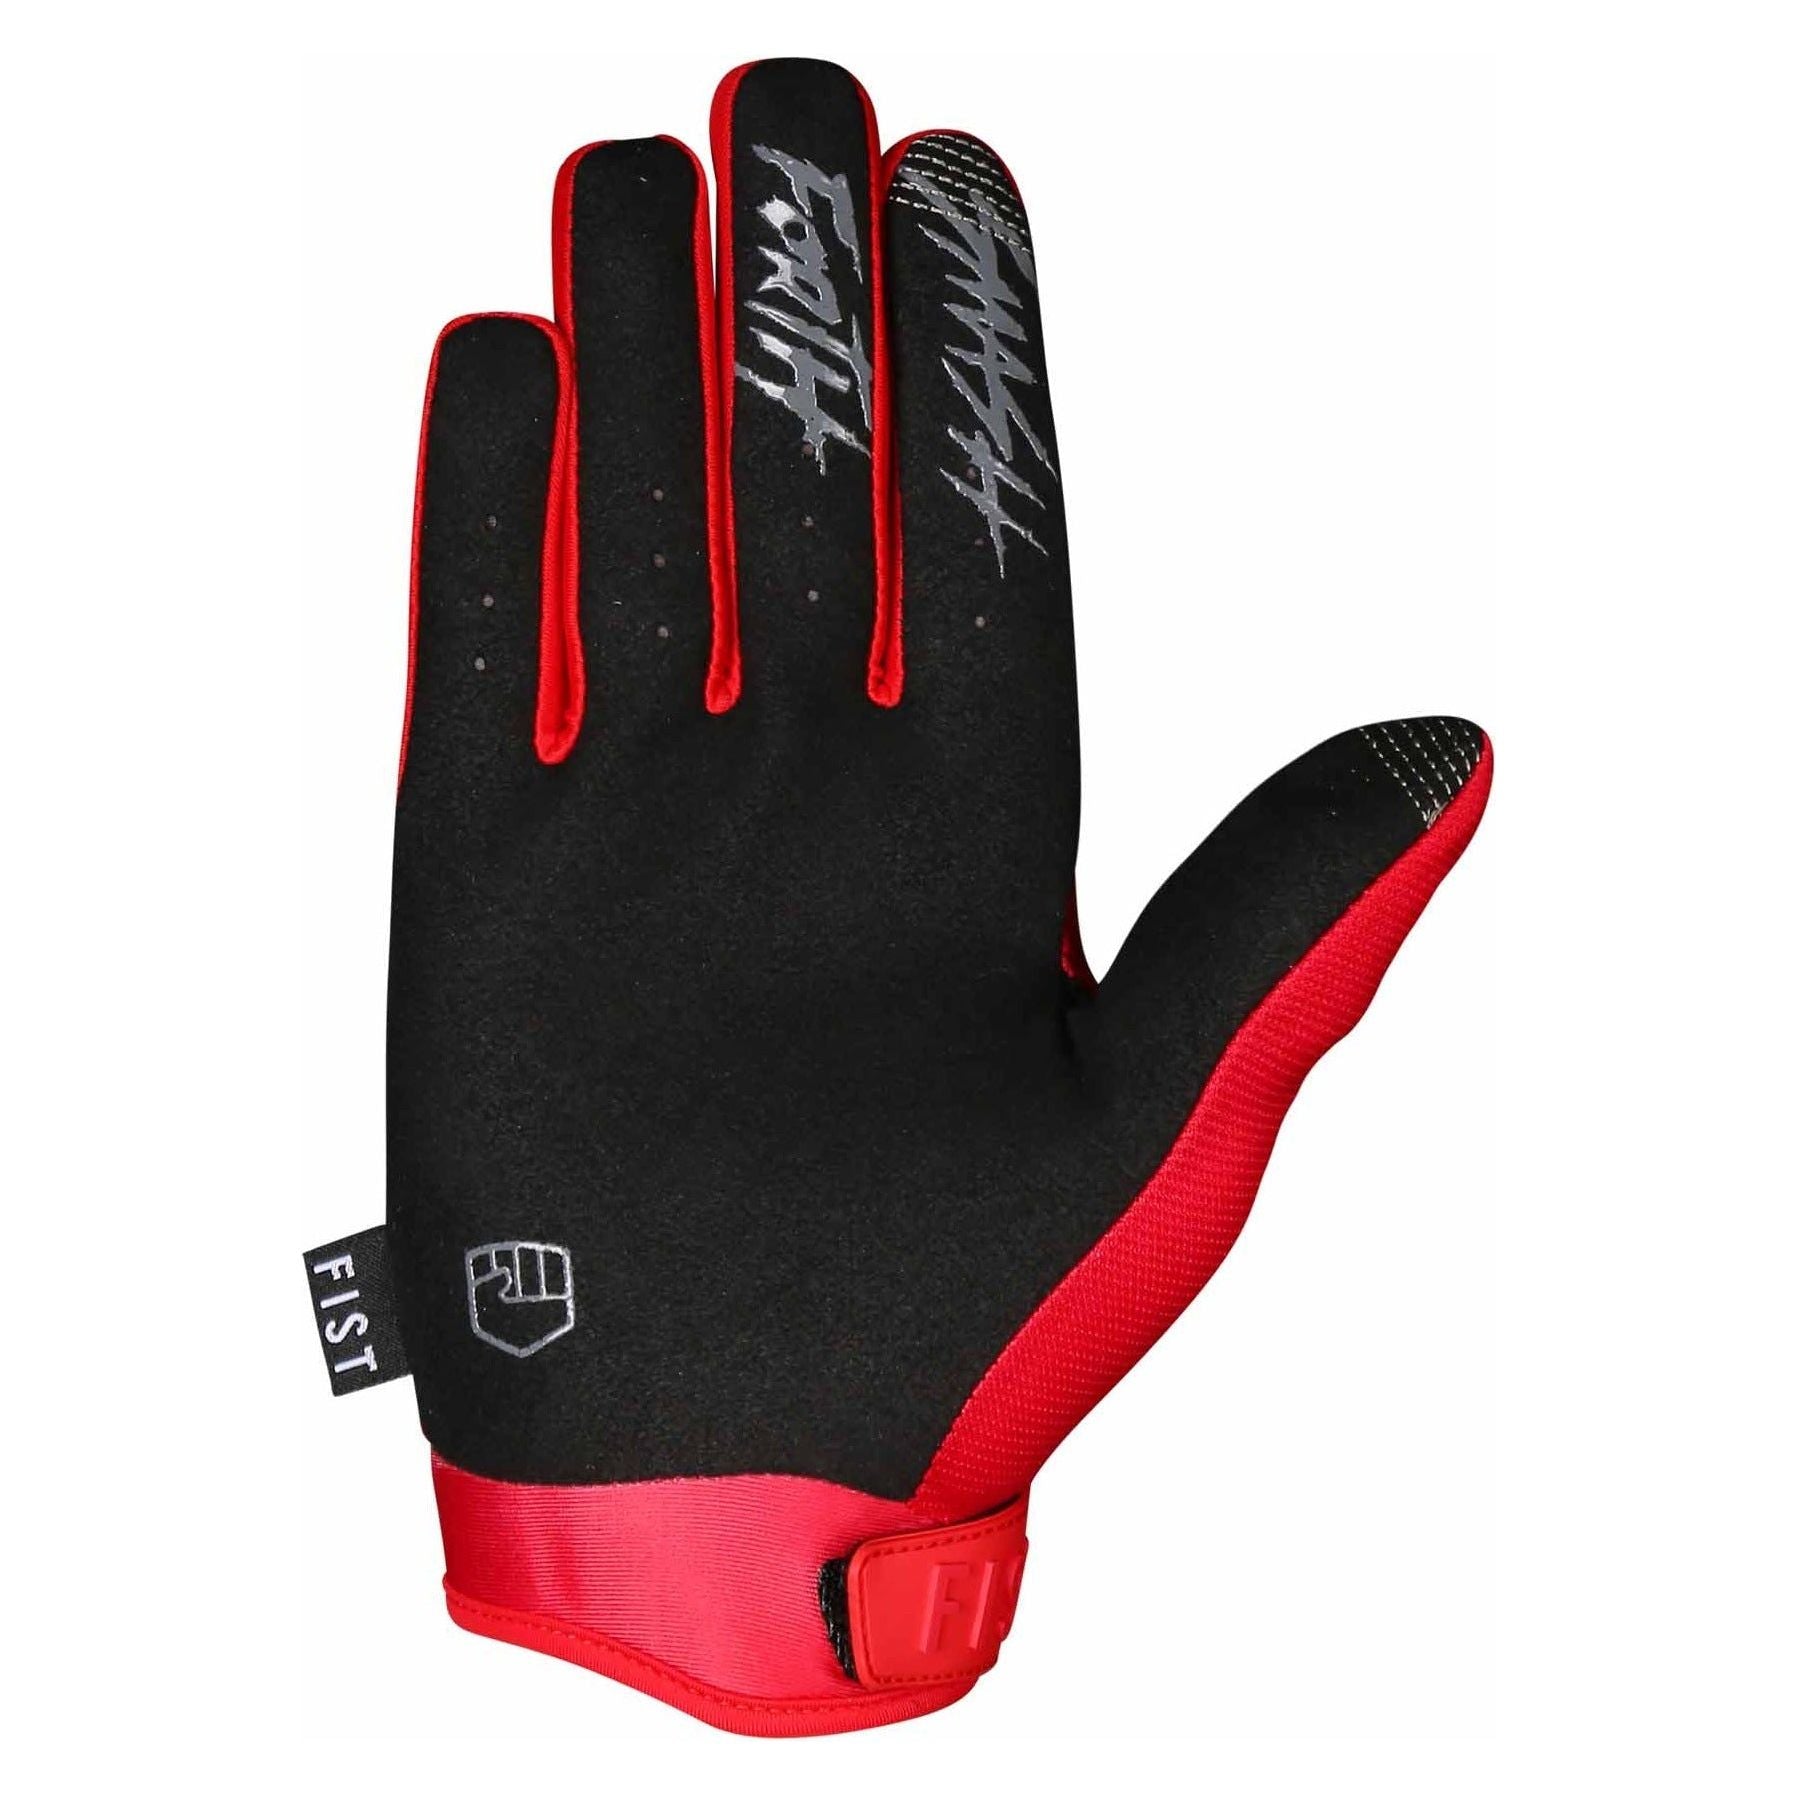 Fist Handwear Stocker Youth Strapped Glove - Youth L - Red Stocker - Image 2